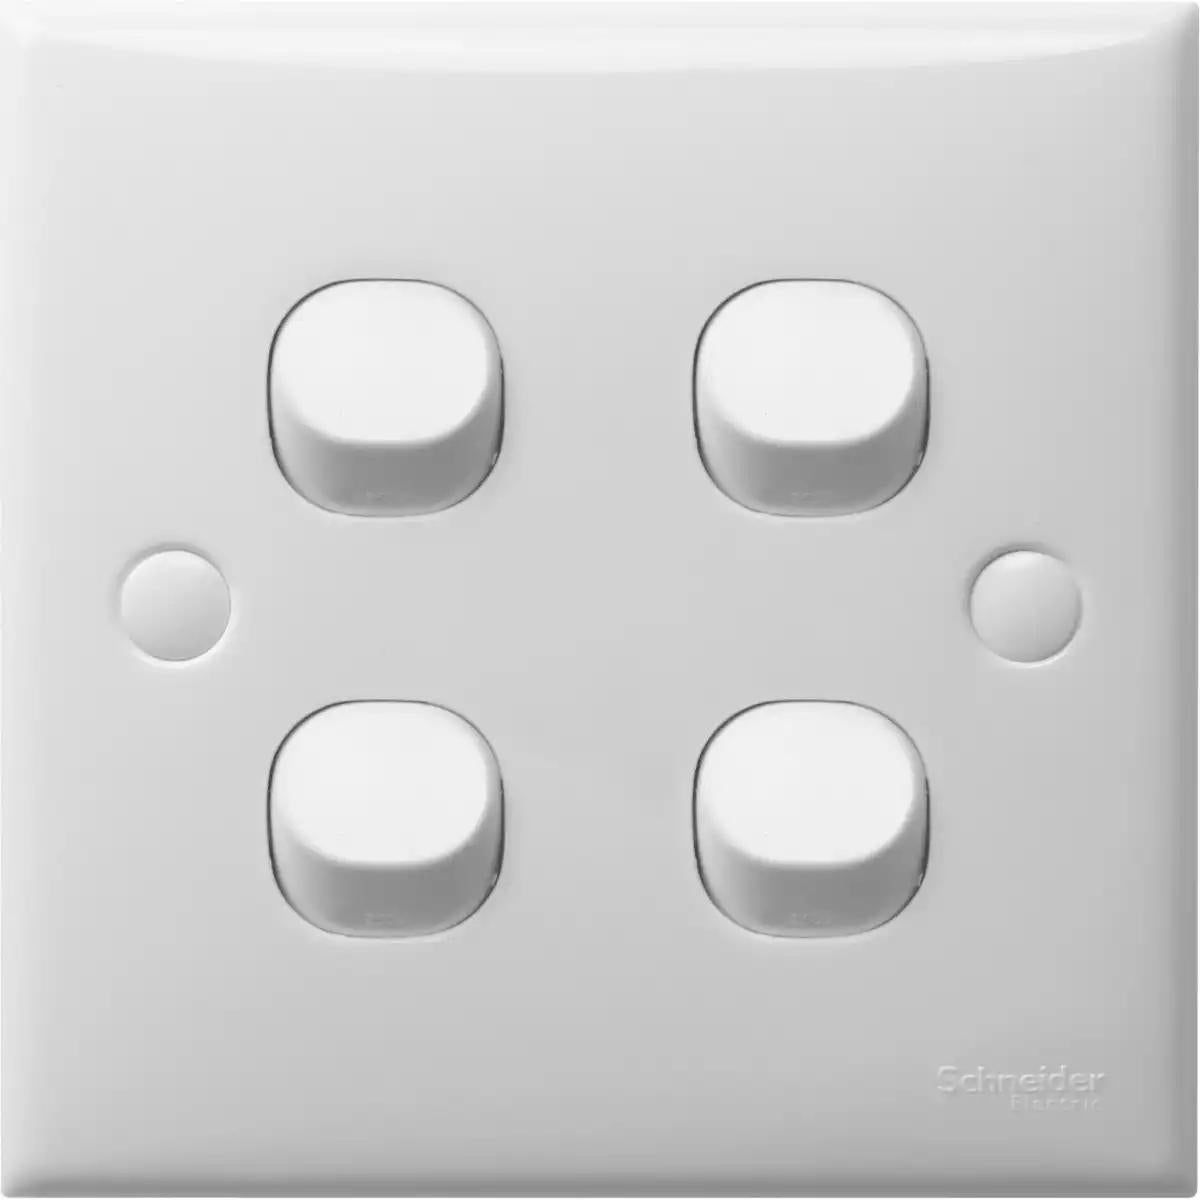 Schneider Electric S-Classic - 1-way switch - 4 gangs - white